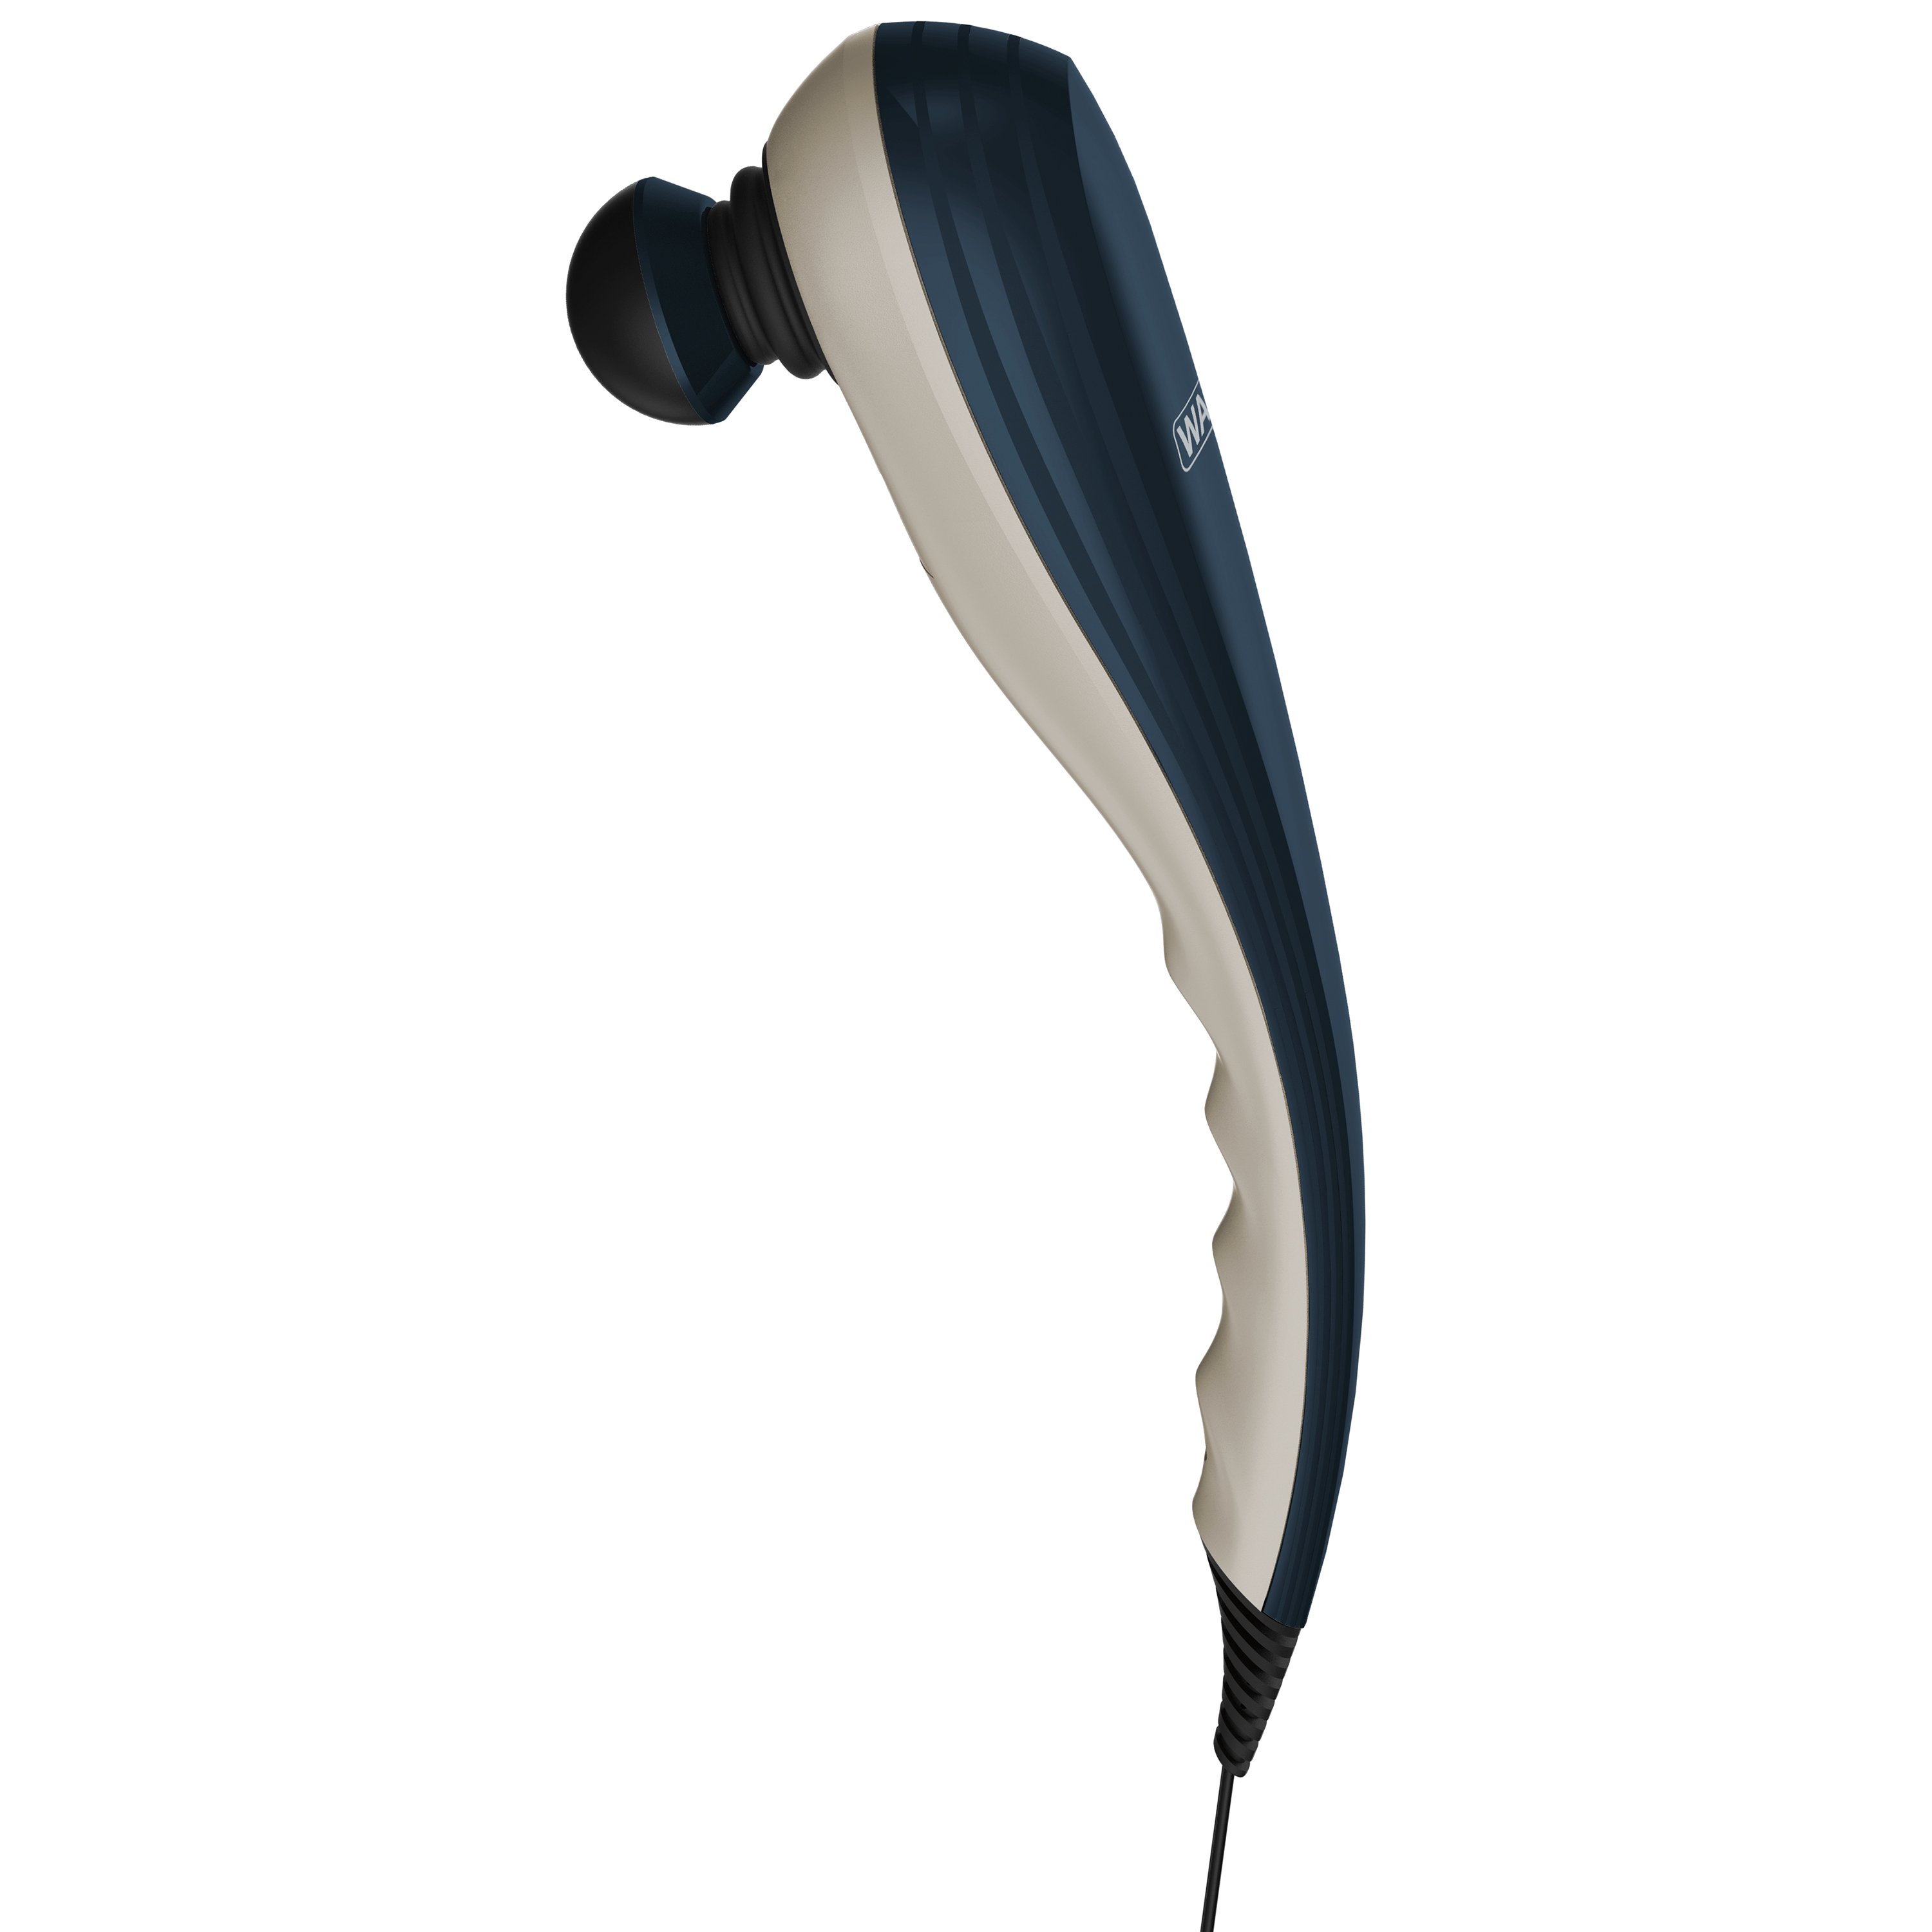 Wahl Handheld Deep Tissue Percussion Therapeutic Massager for Full Body Massage, Model 4290-300 - image 1 of 10